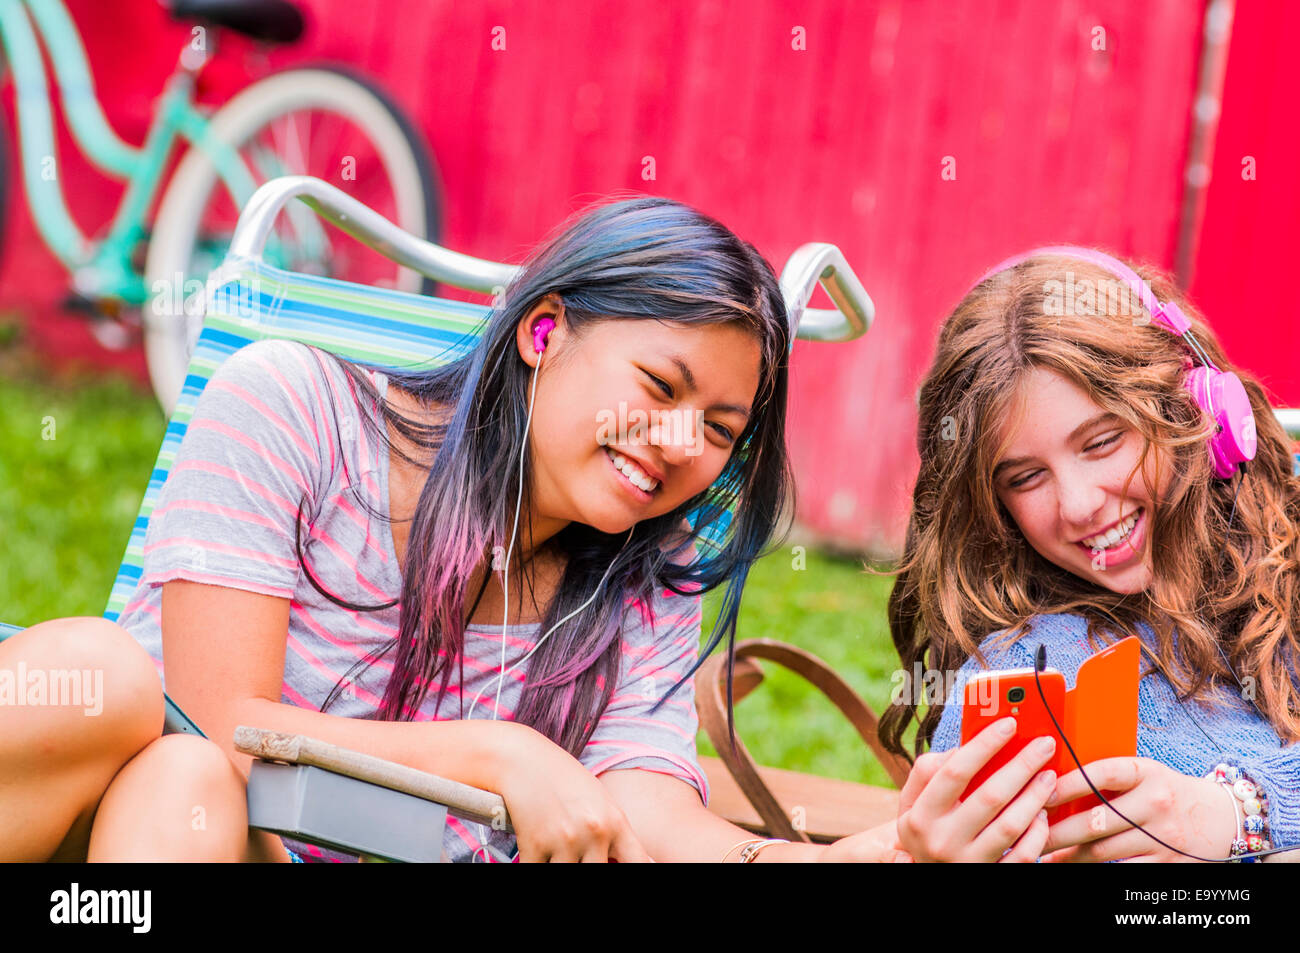 Two teenagers wearing headphones, listening to music, outdoors Stock Photo